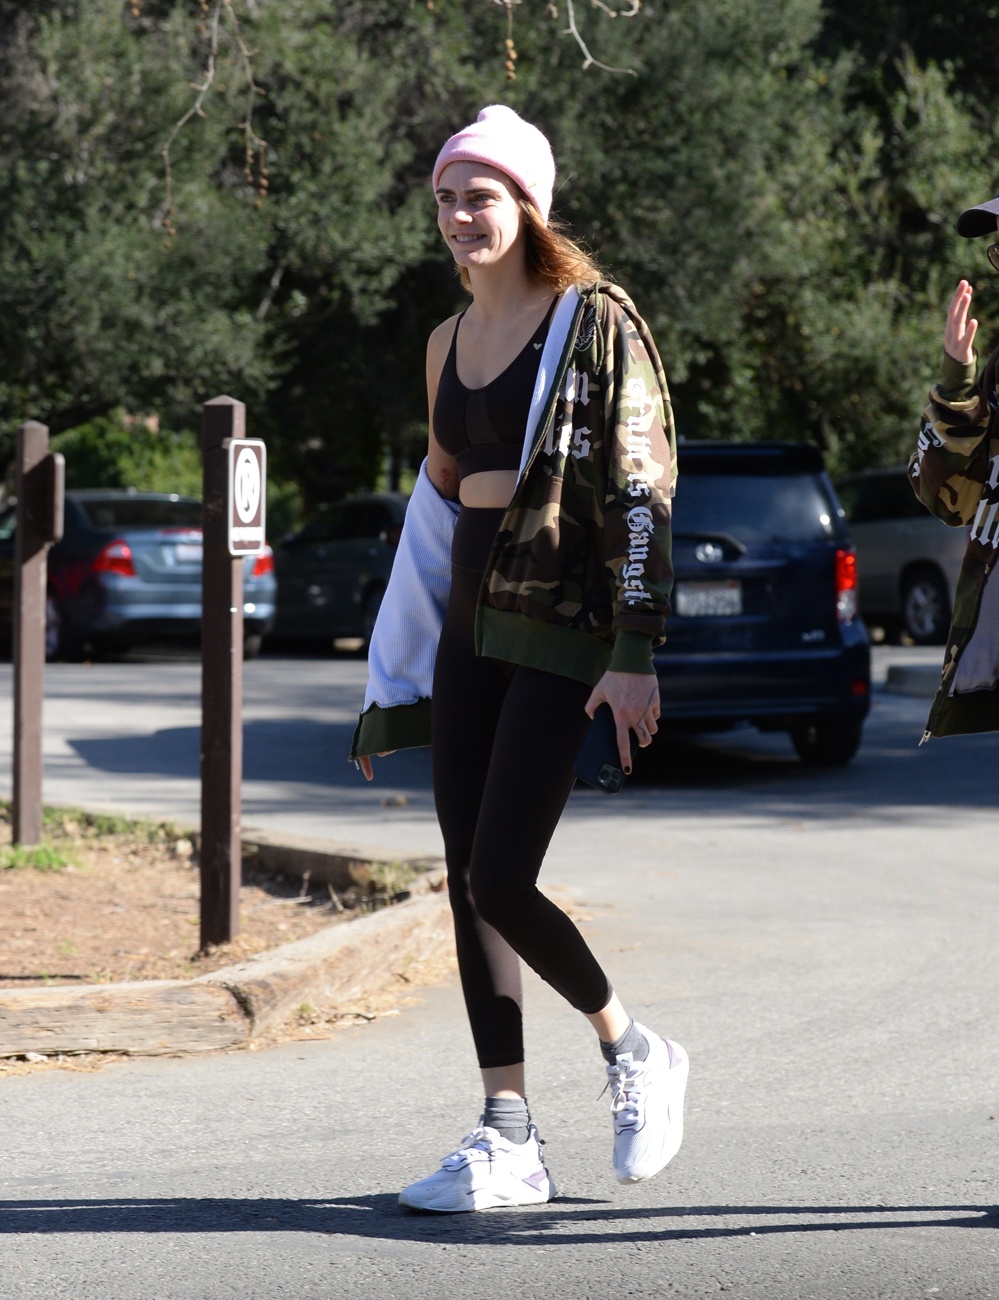 Cara Delevingne strolls through the streets of Los Angeles